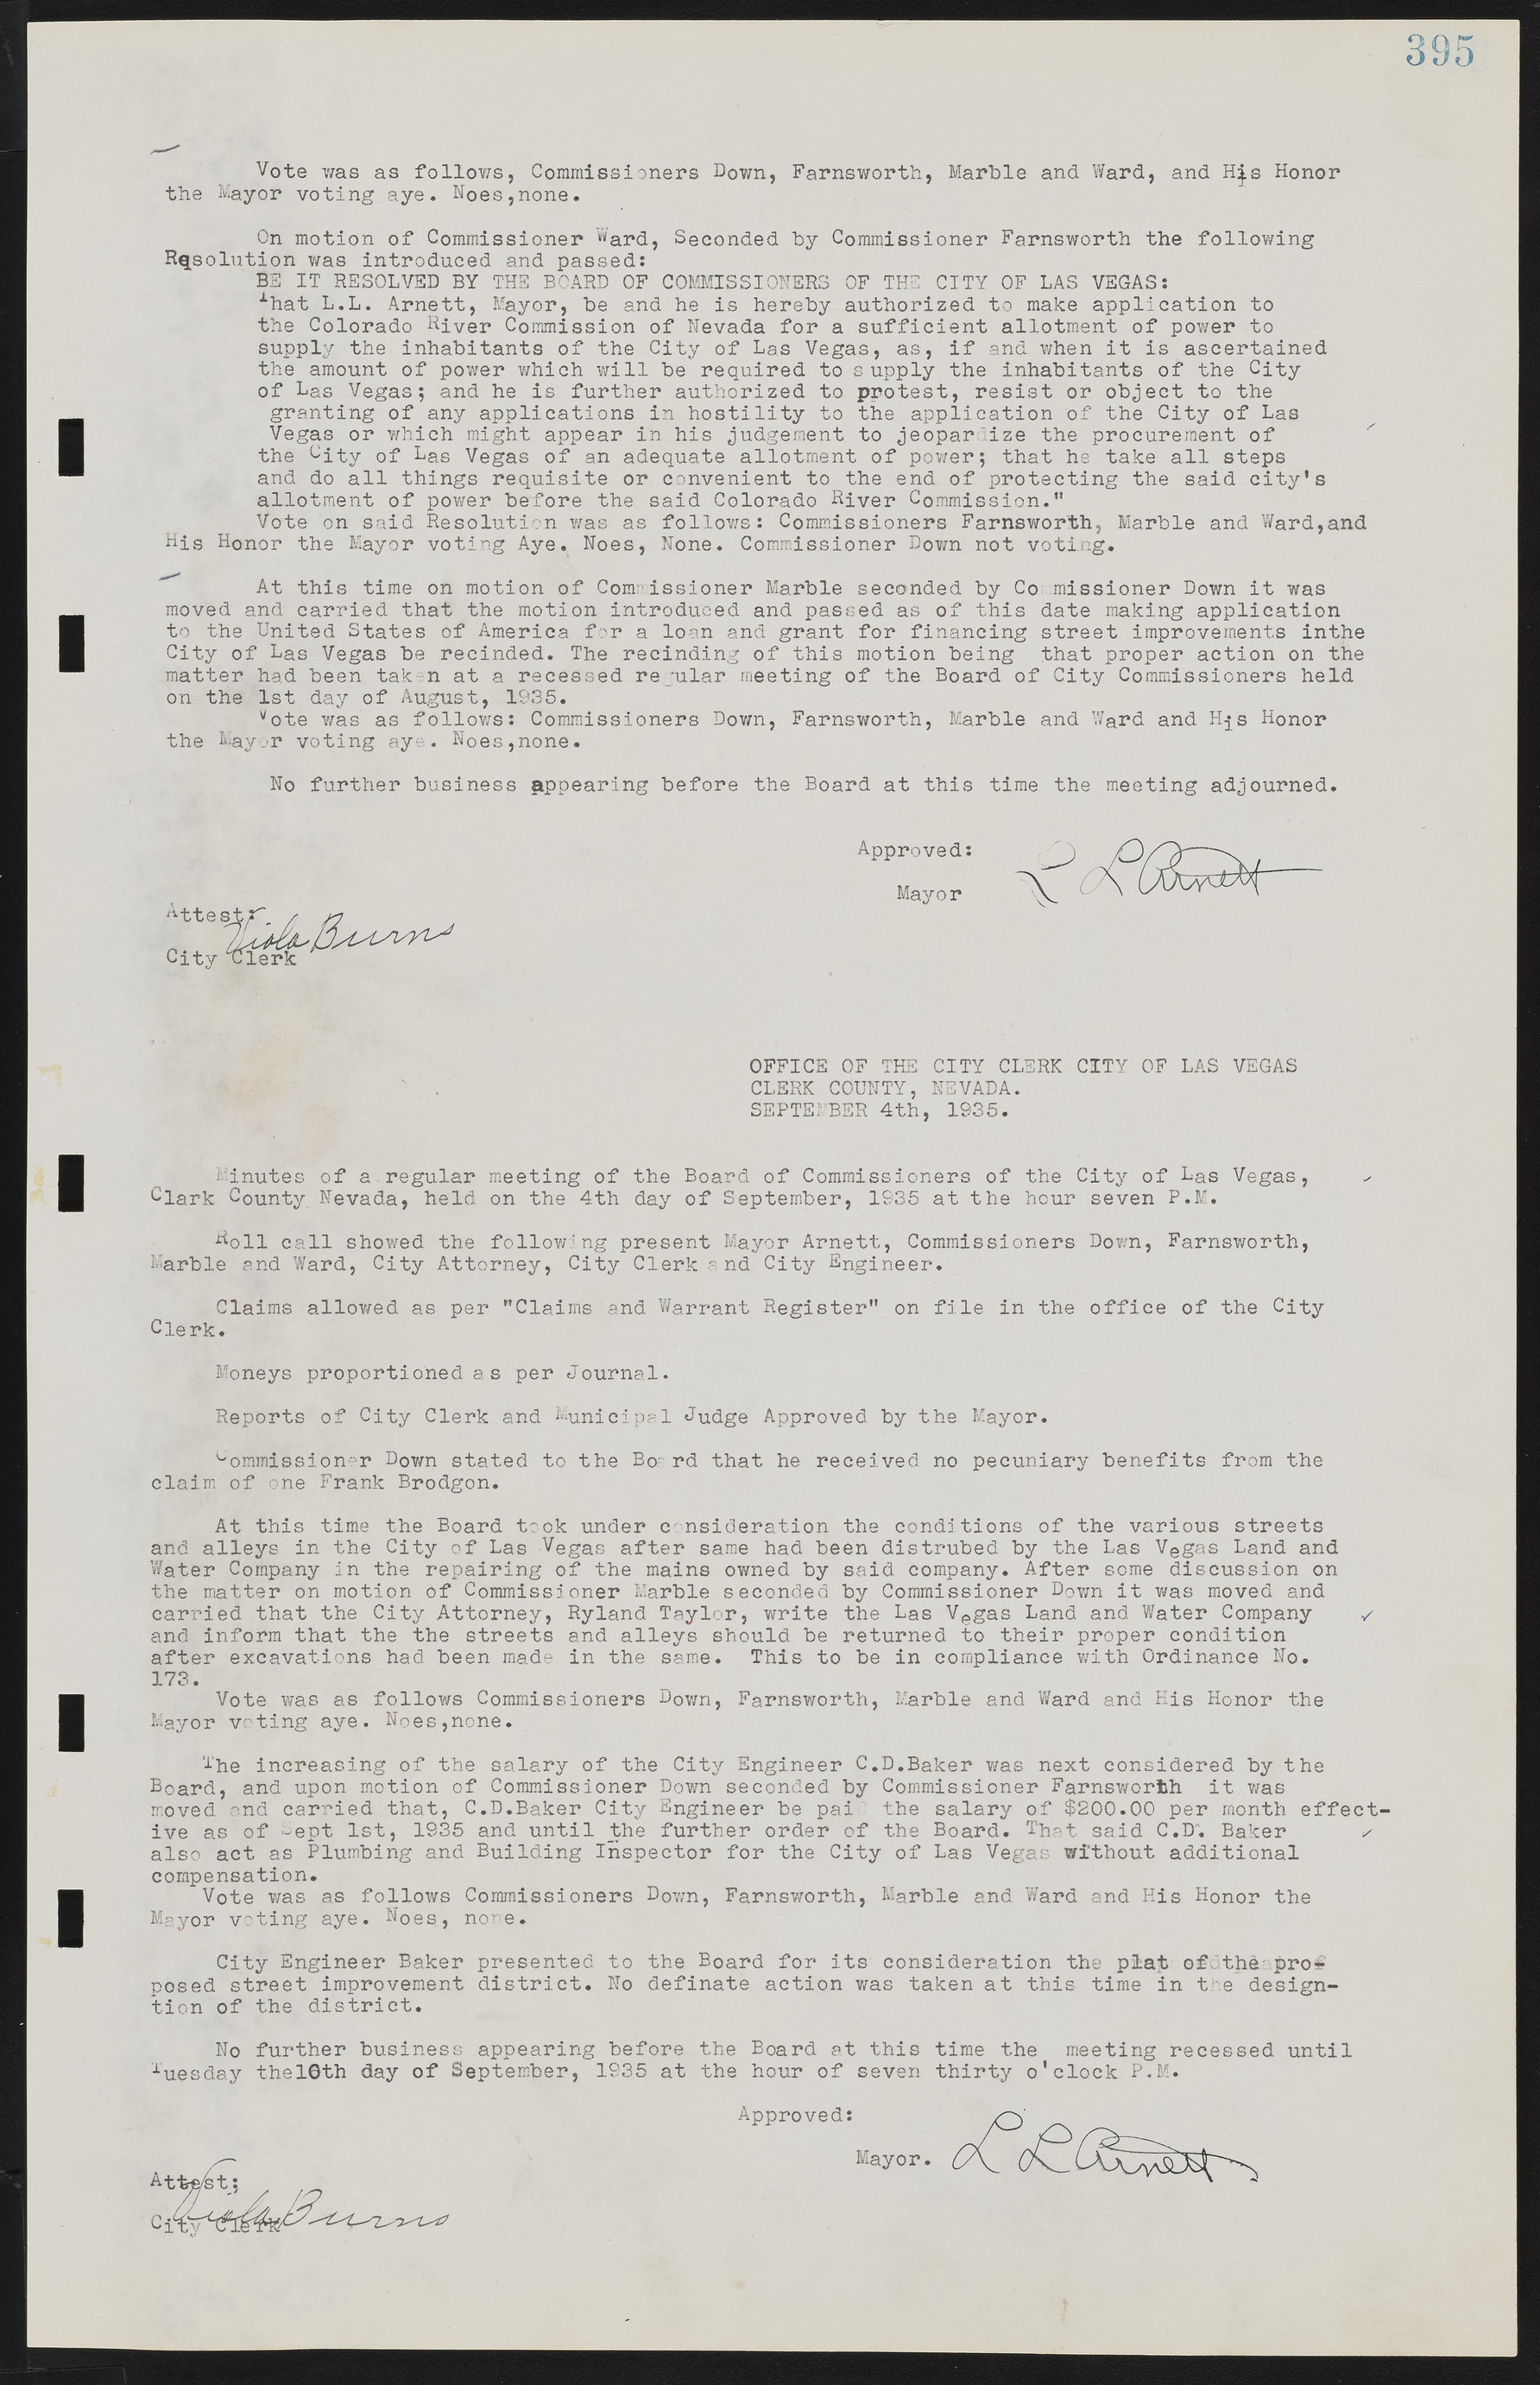 Las Vegas City Commission Minutes, May 14, 1929 to February 11, 1937, lvc000003-402